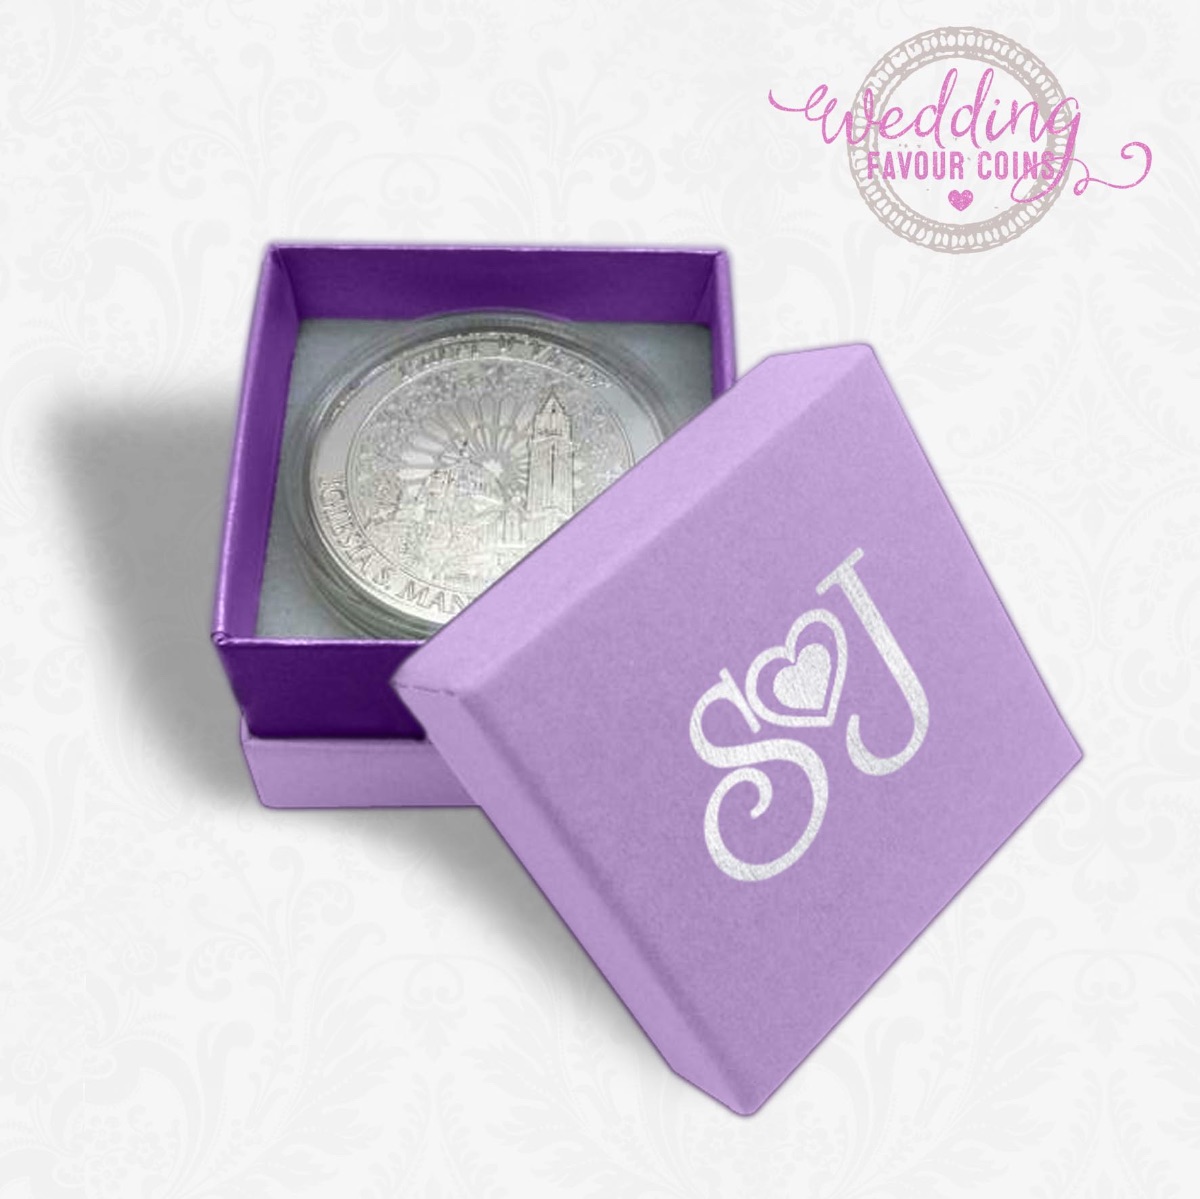 The Wedding Favour Coins-Image-13